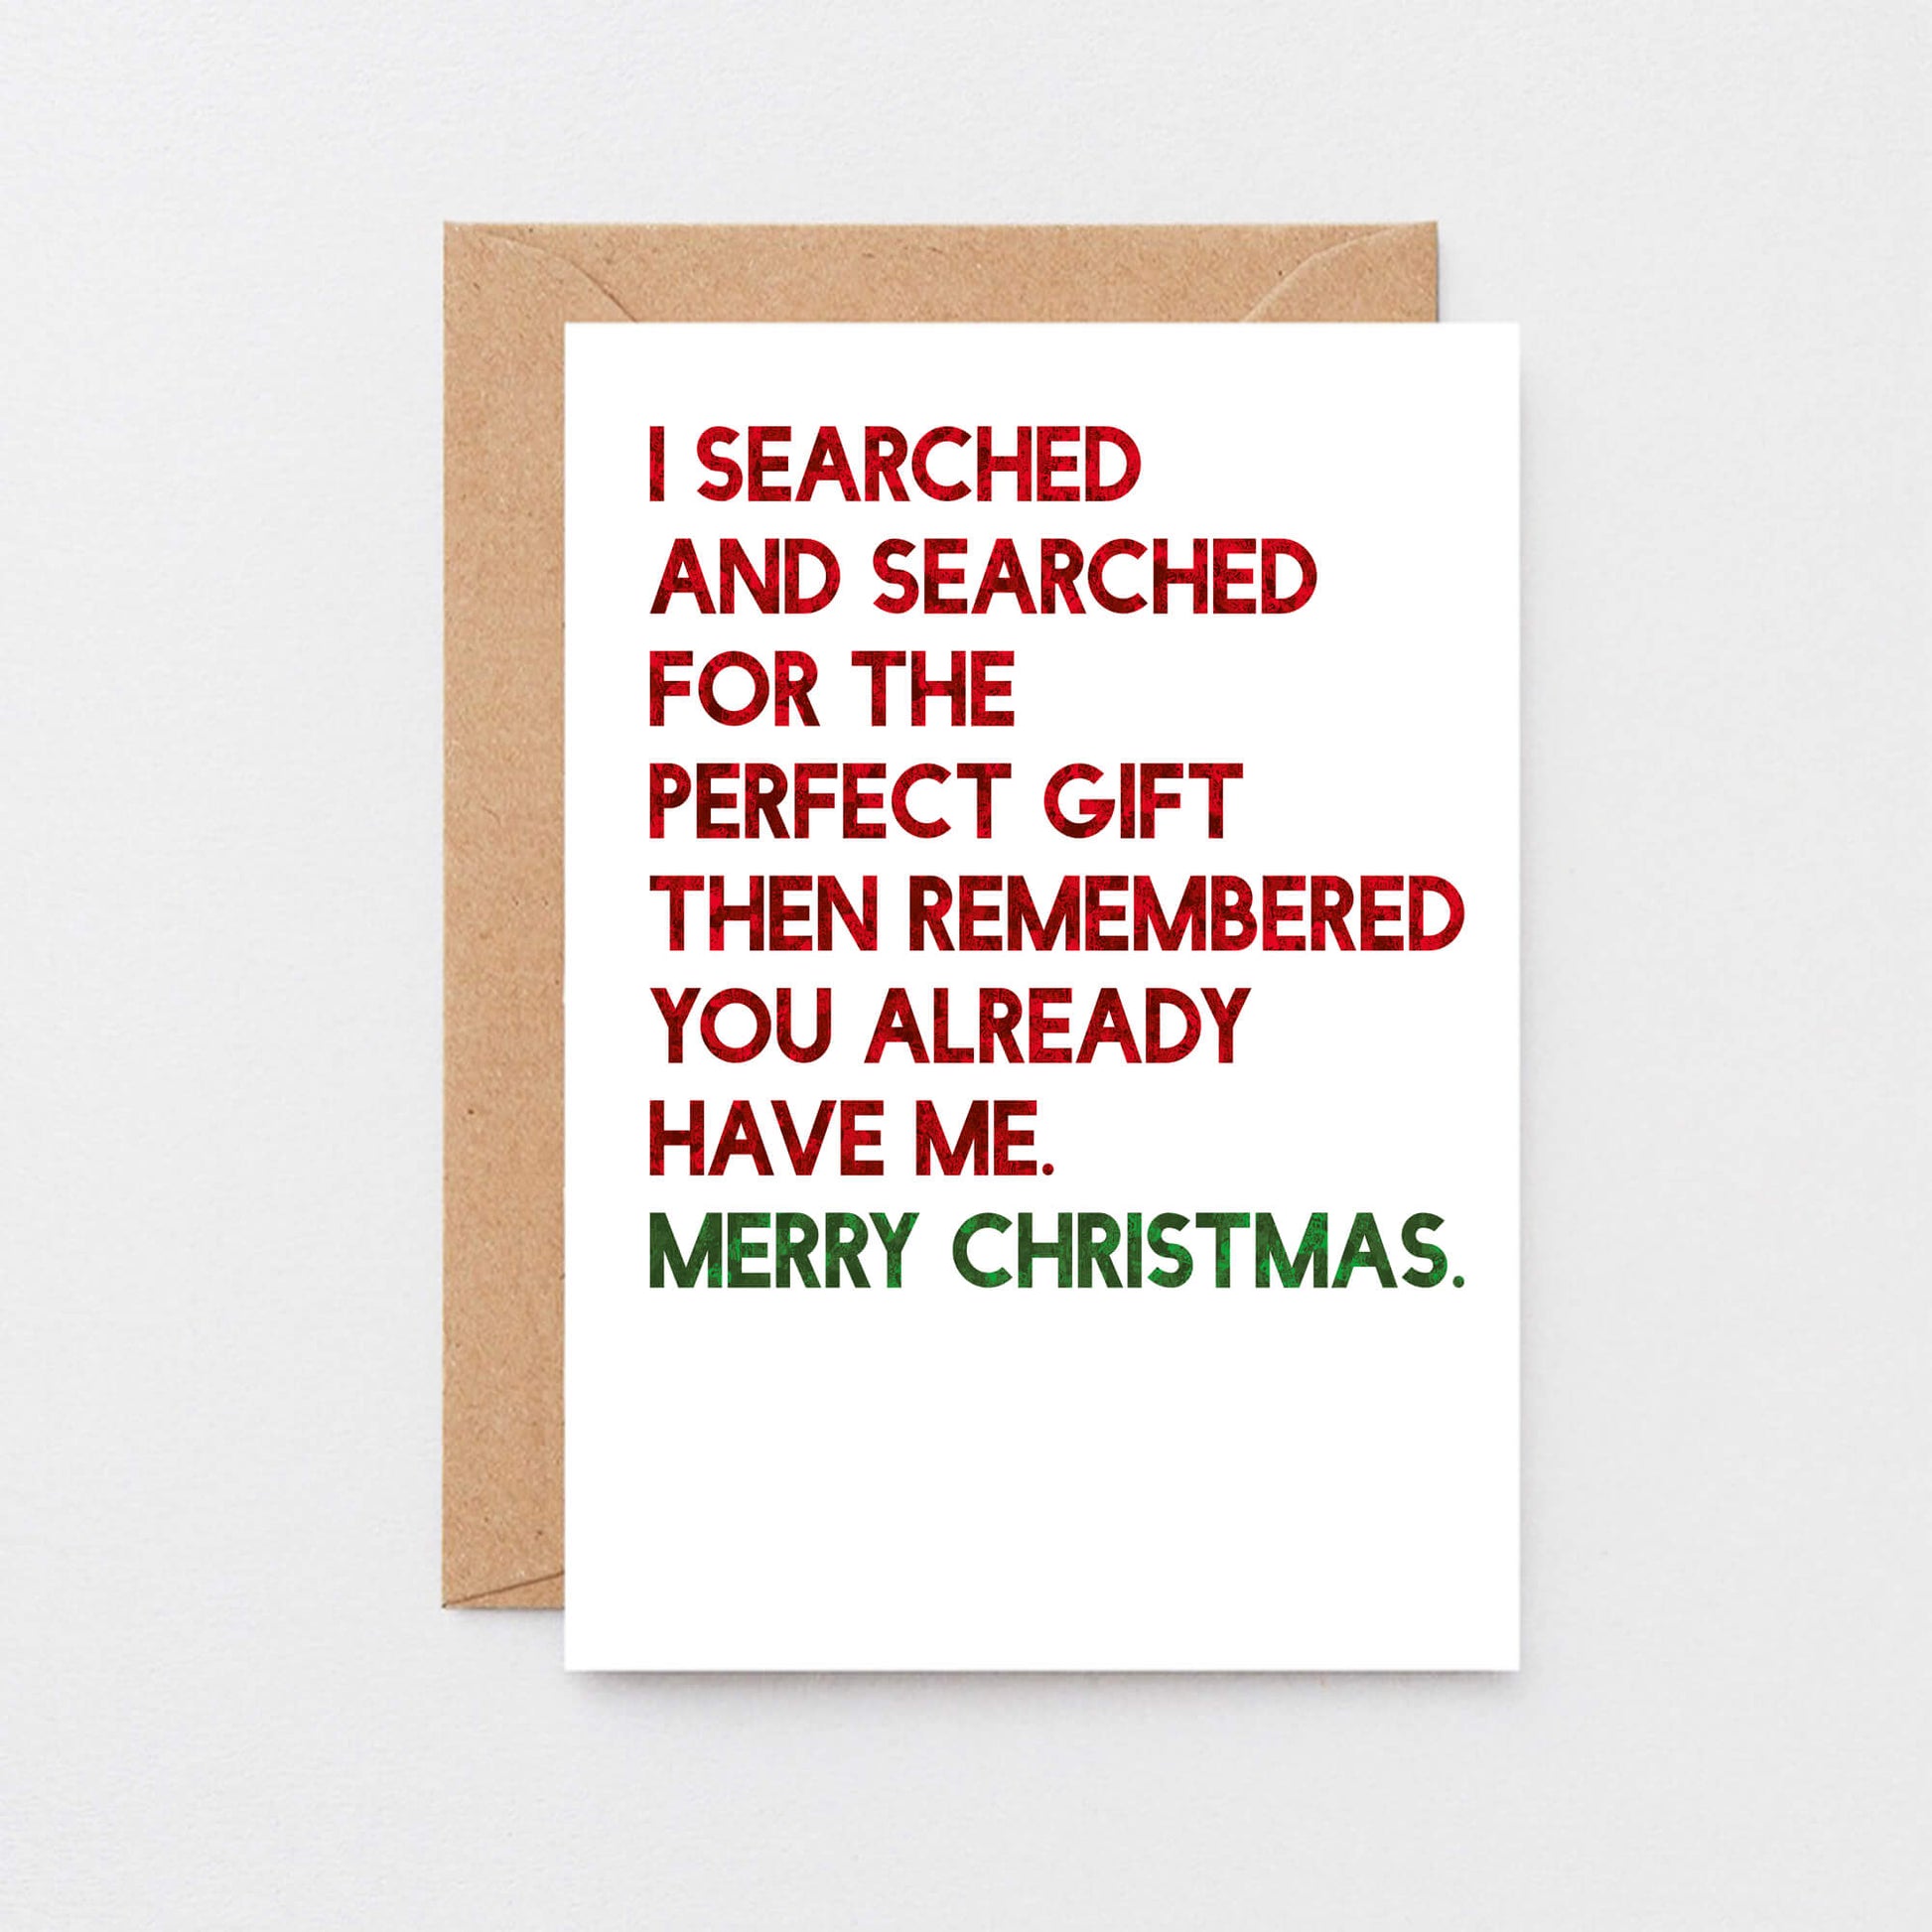 Christmas Card by SixElevenCreations. Reads I searched and searched for the perfect gift then remembered you already have me. Merry Christmas. Product Code SEC0055A5